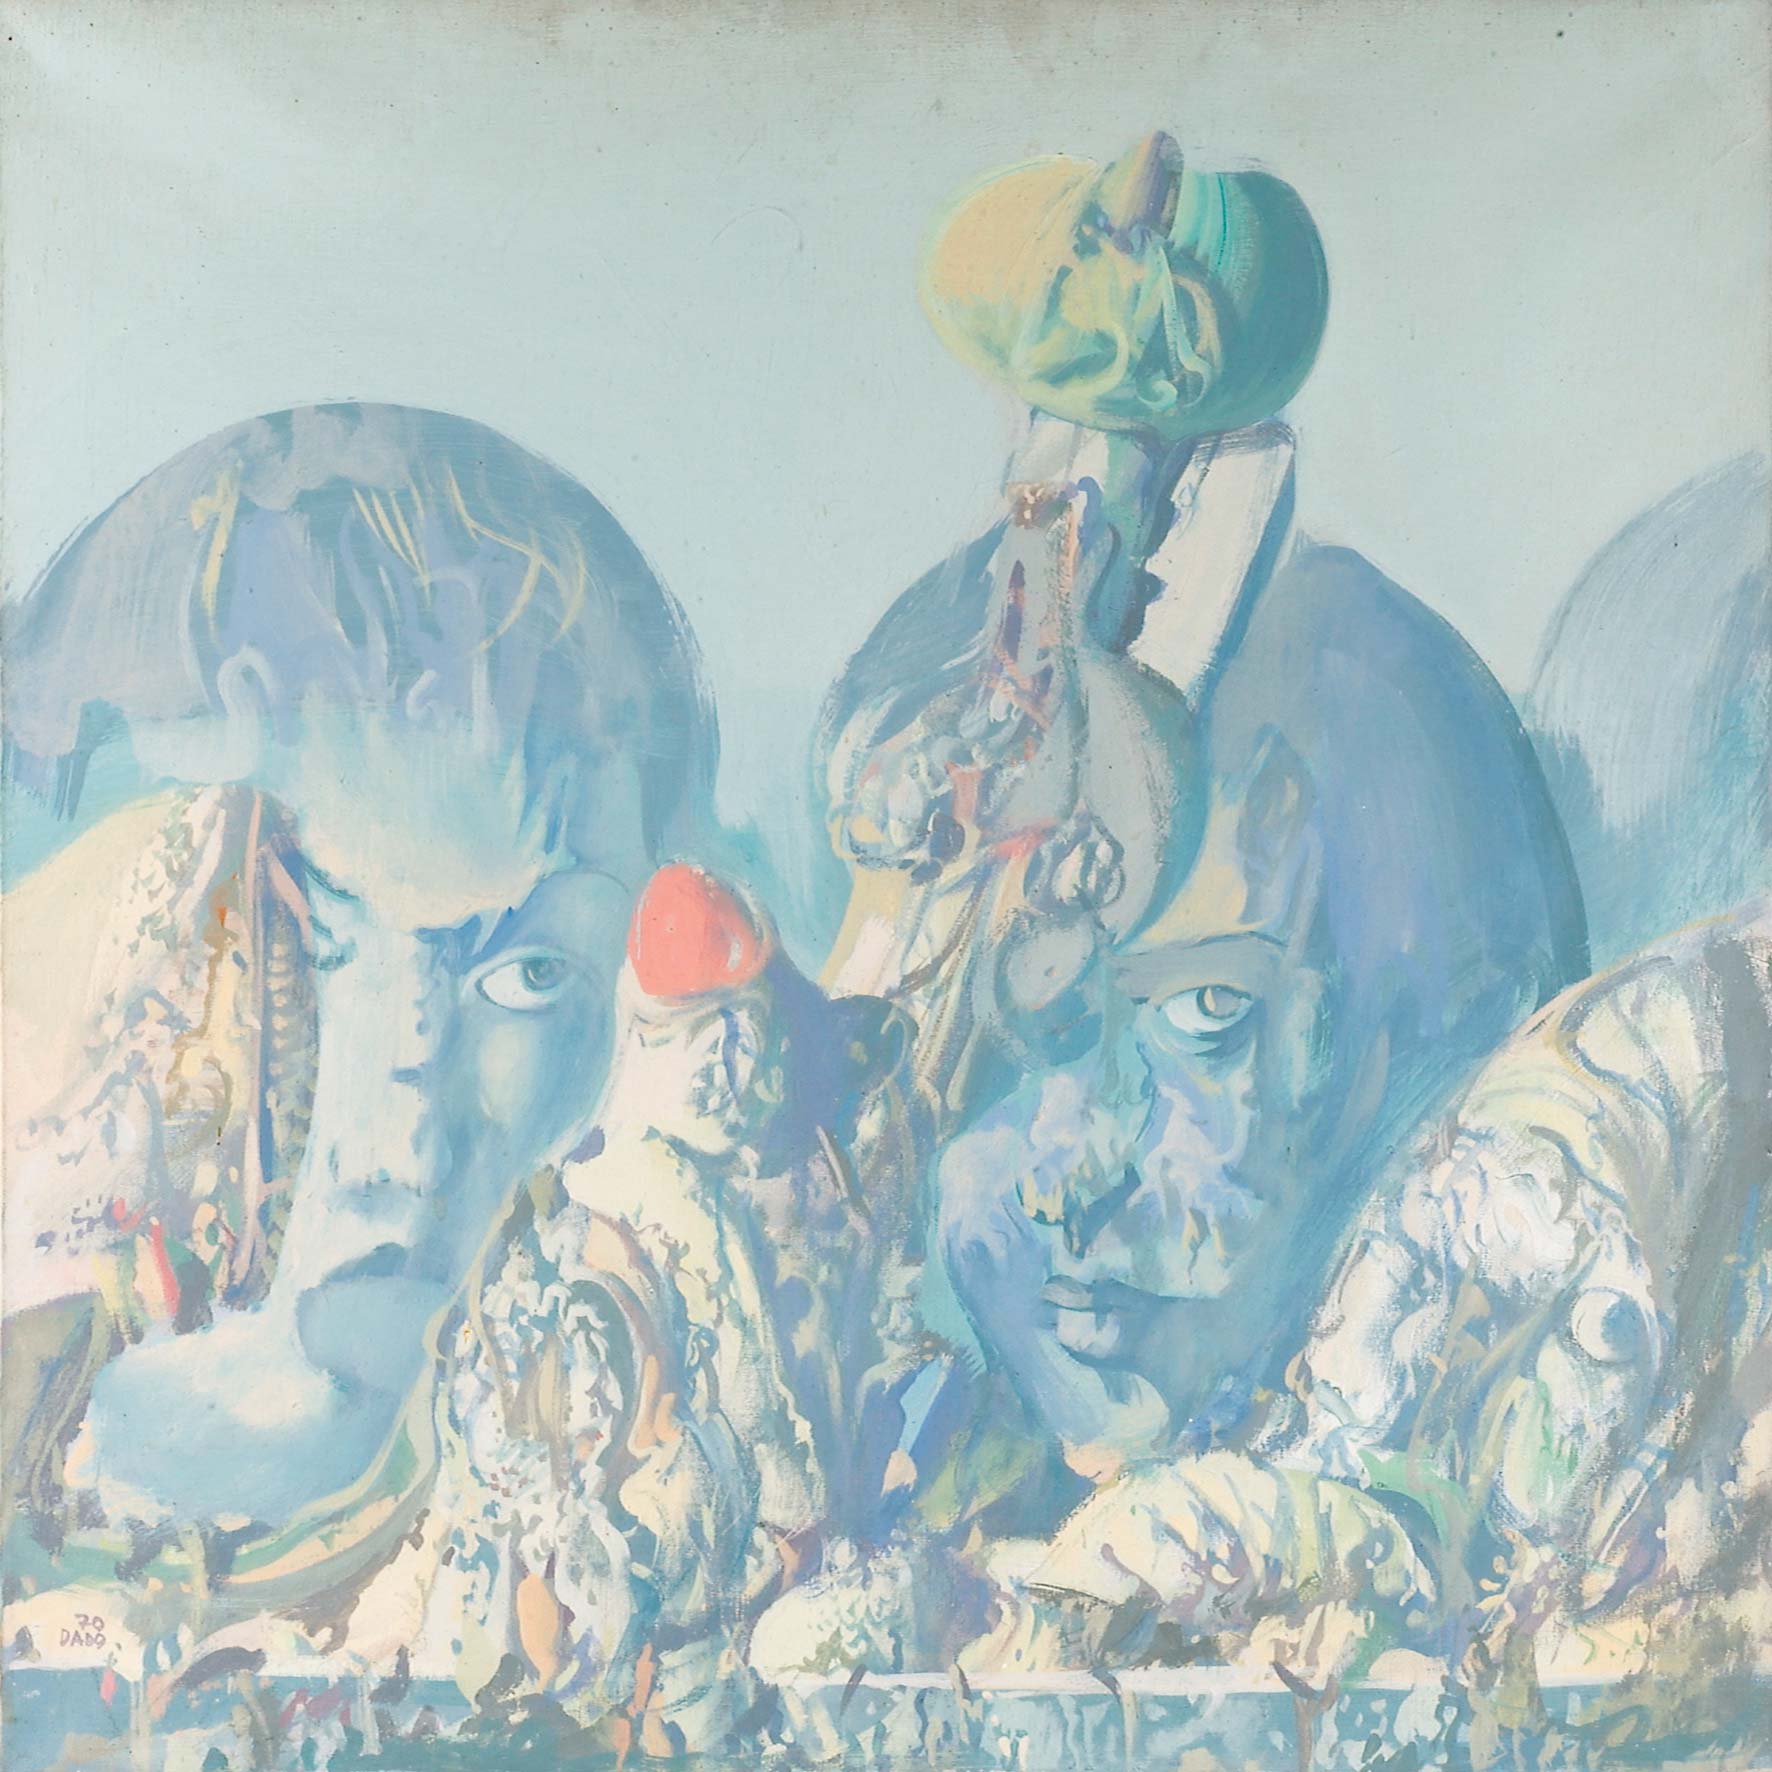 Dado’s painting: Untitled, 1970